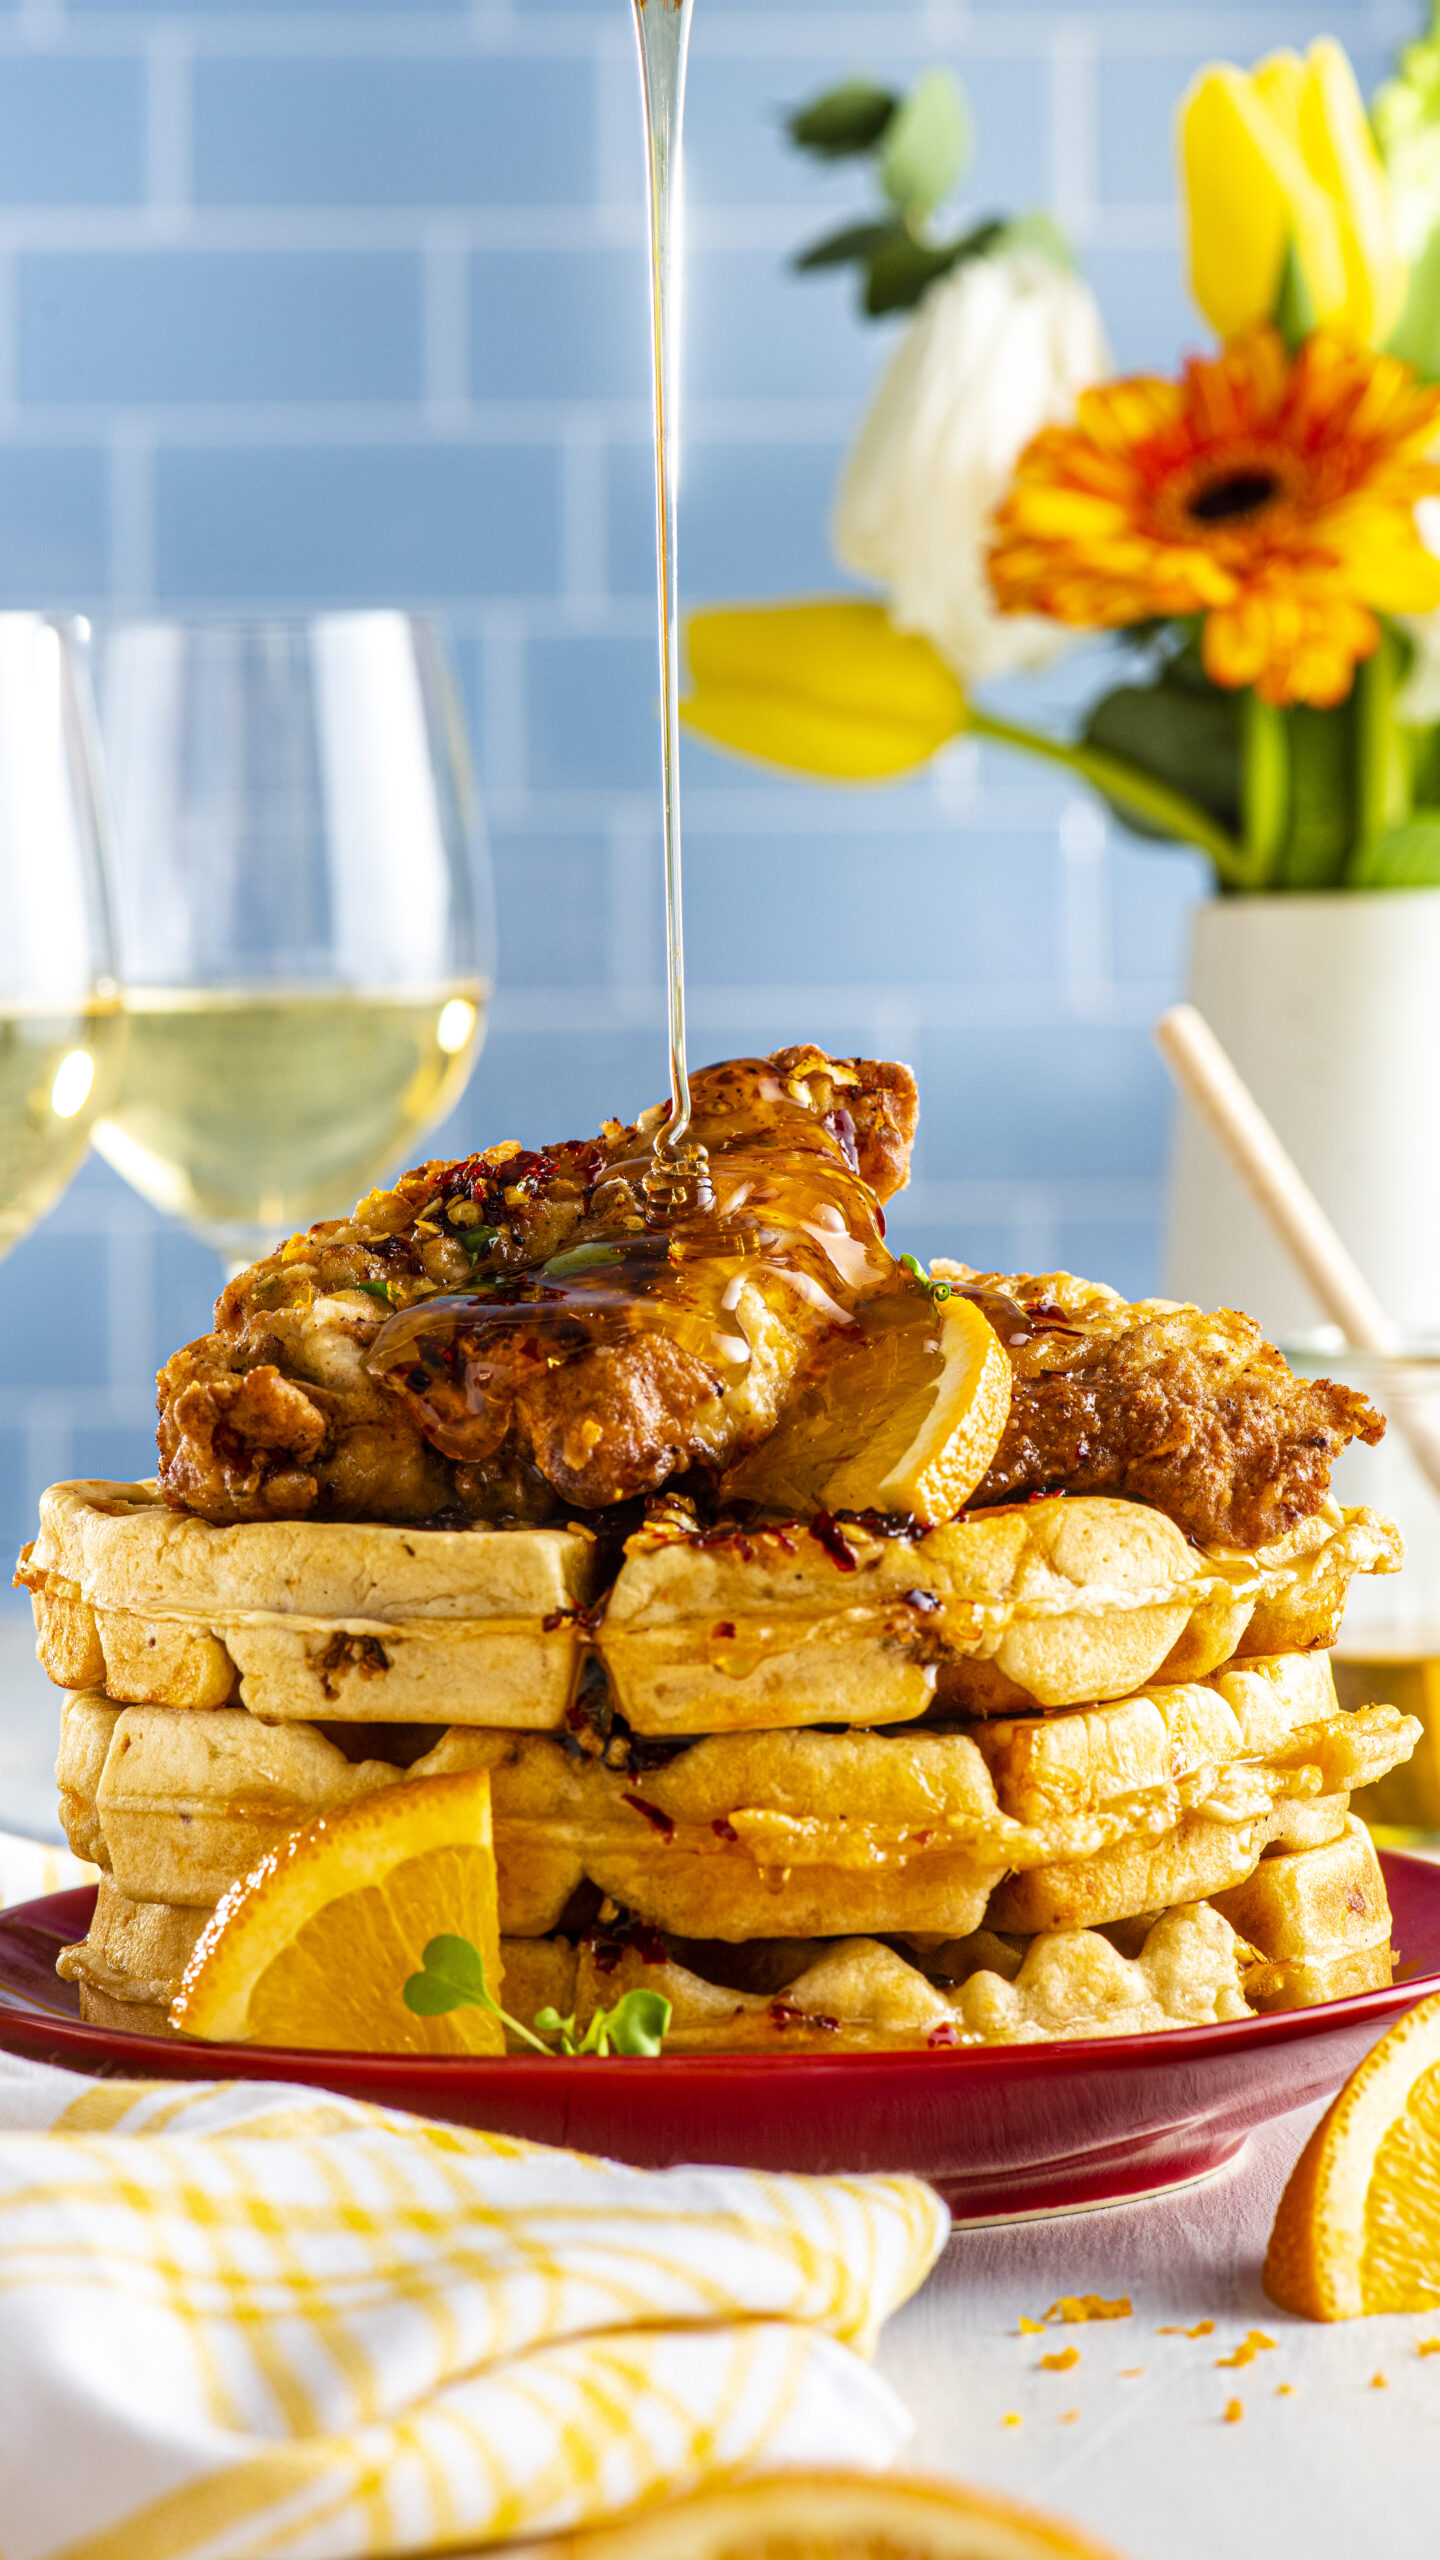 Chicken and Waffles with Spicy Honey Sauce